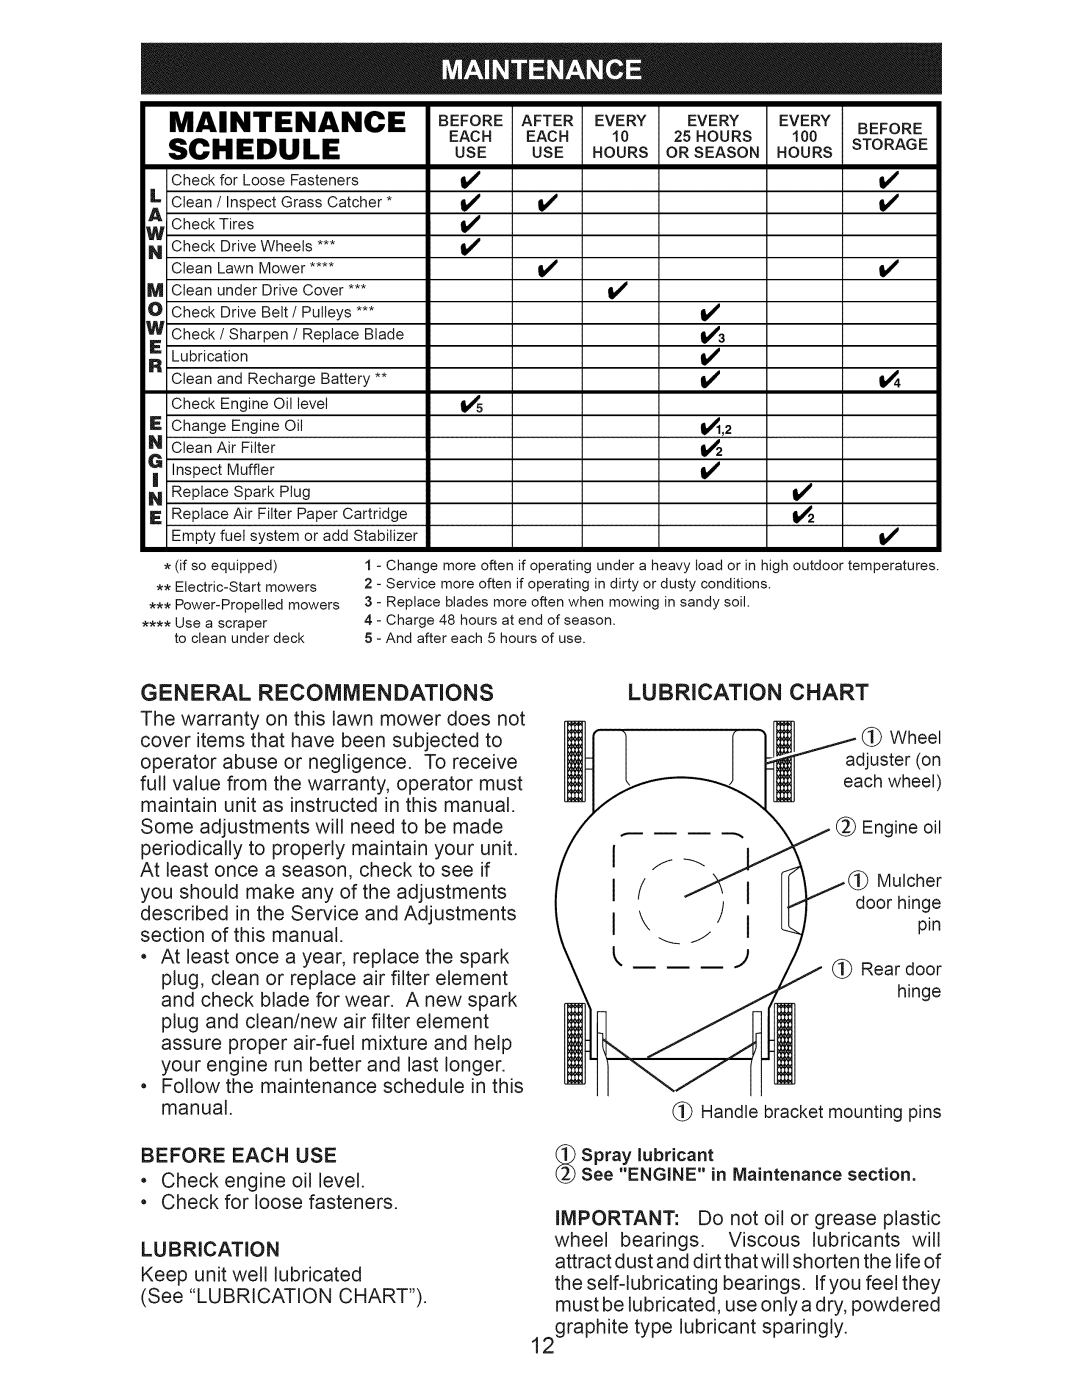 Craftsman 917.376405 owner manual General Recommendations, Lubrication Chart, Before Each USE, Before After Every 